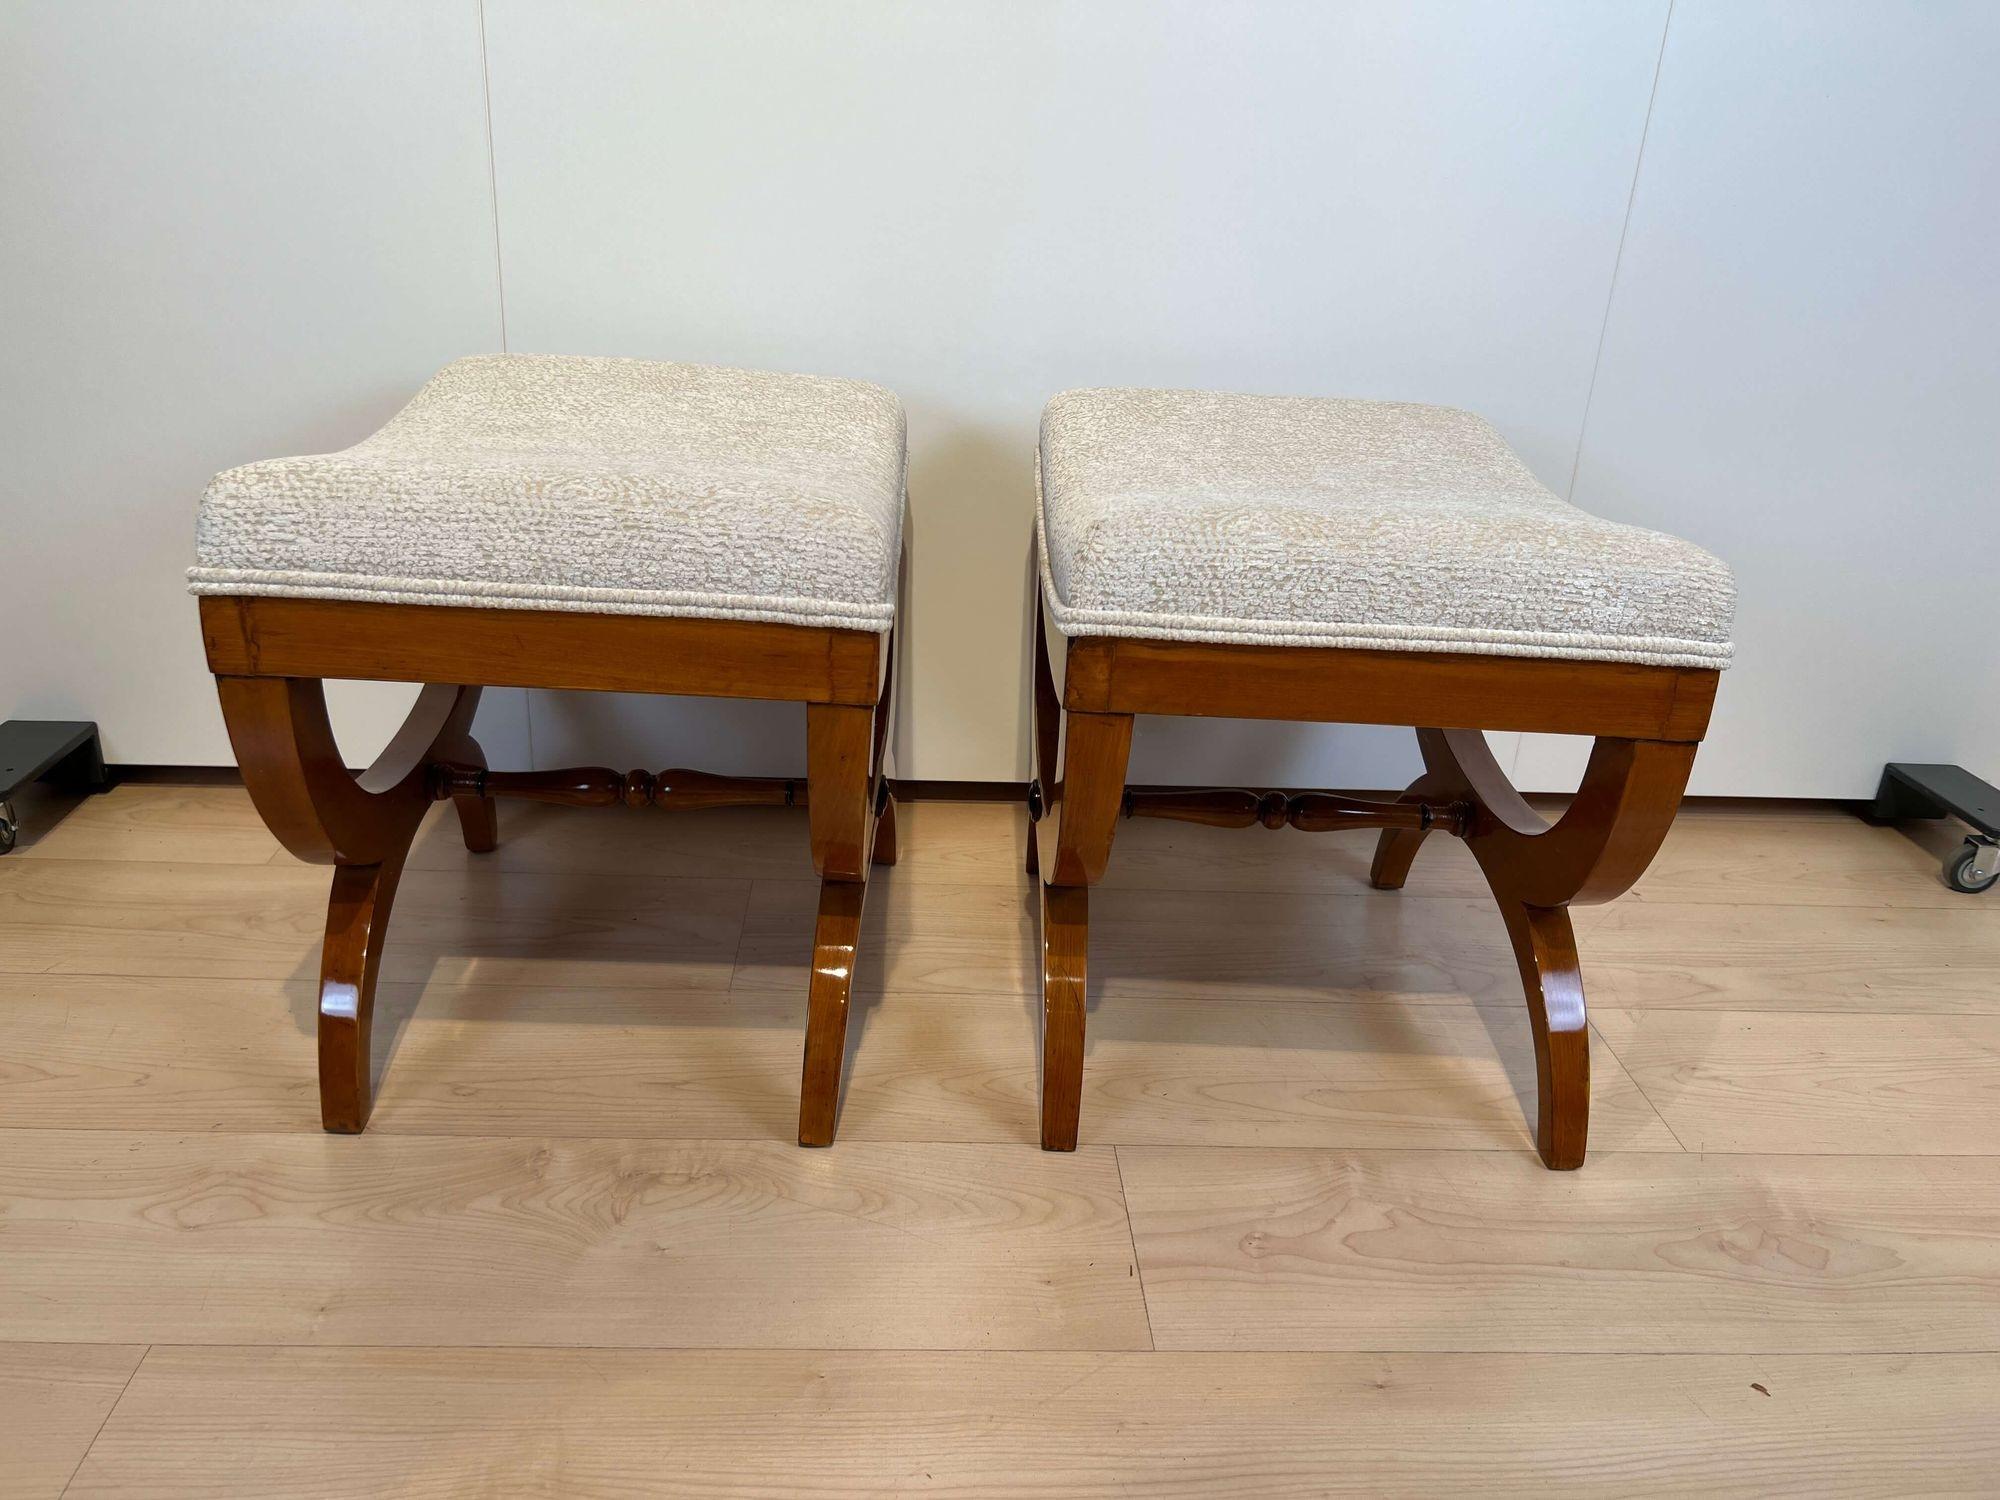 Pair of Large Tabourets, Beech Wood, France, circa 1860 In Good Condition For Sale In Regensburg, DE